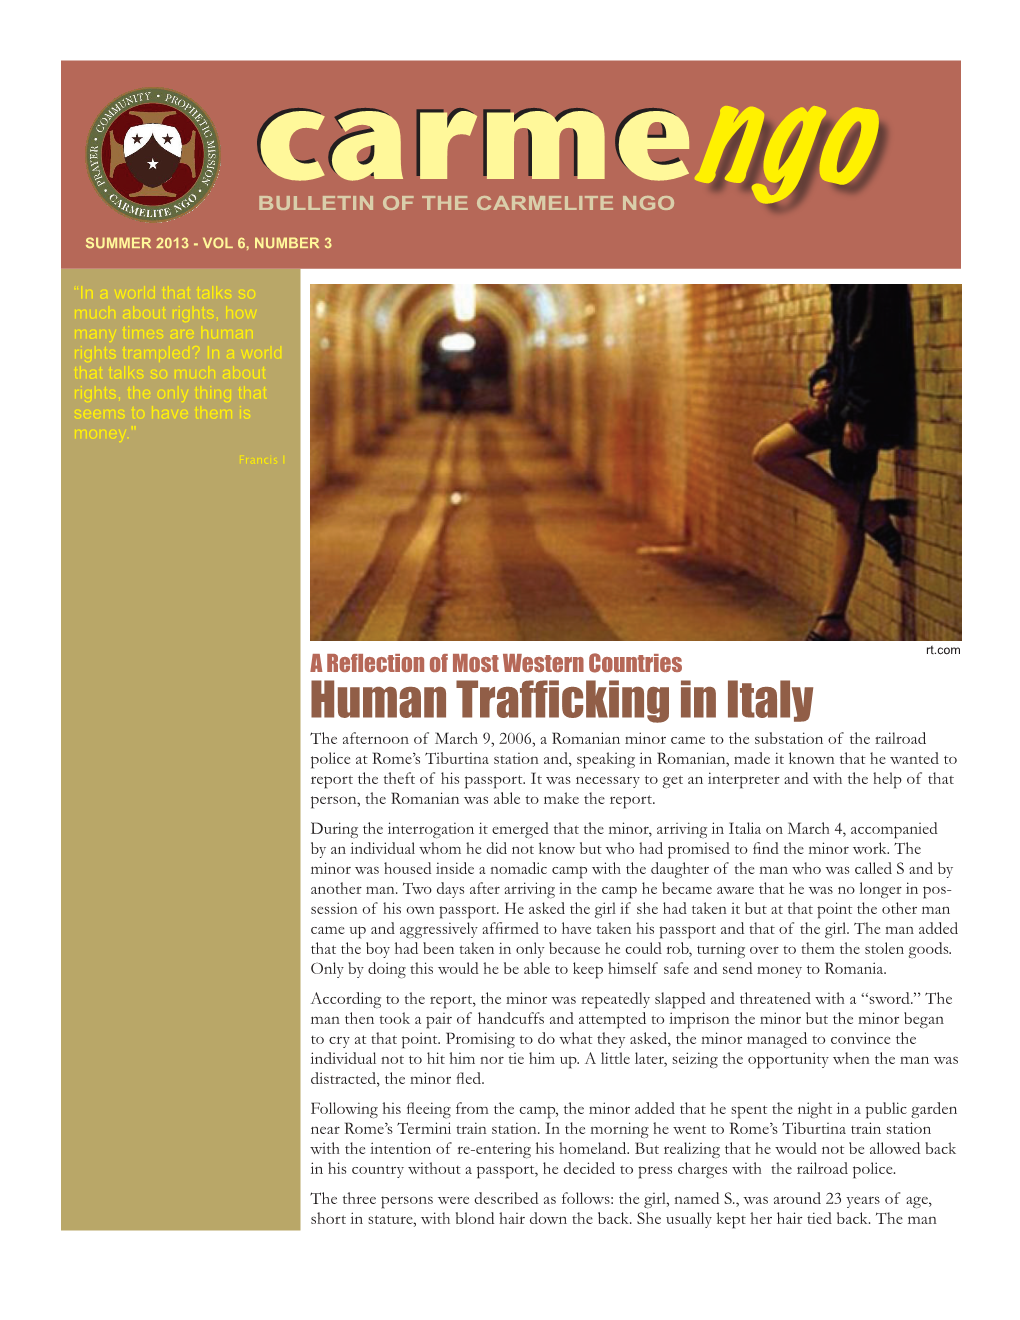 Human Trafficking in Italy